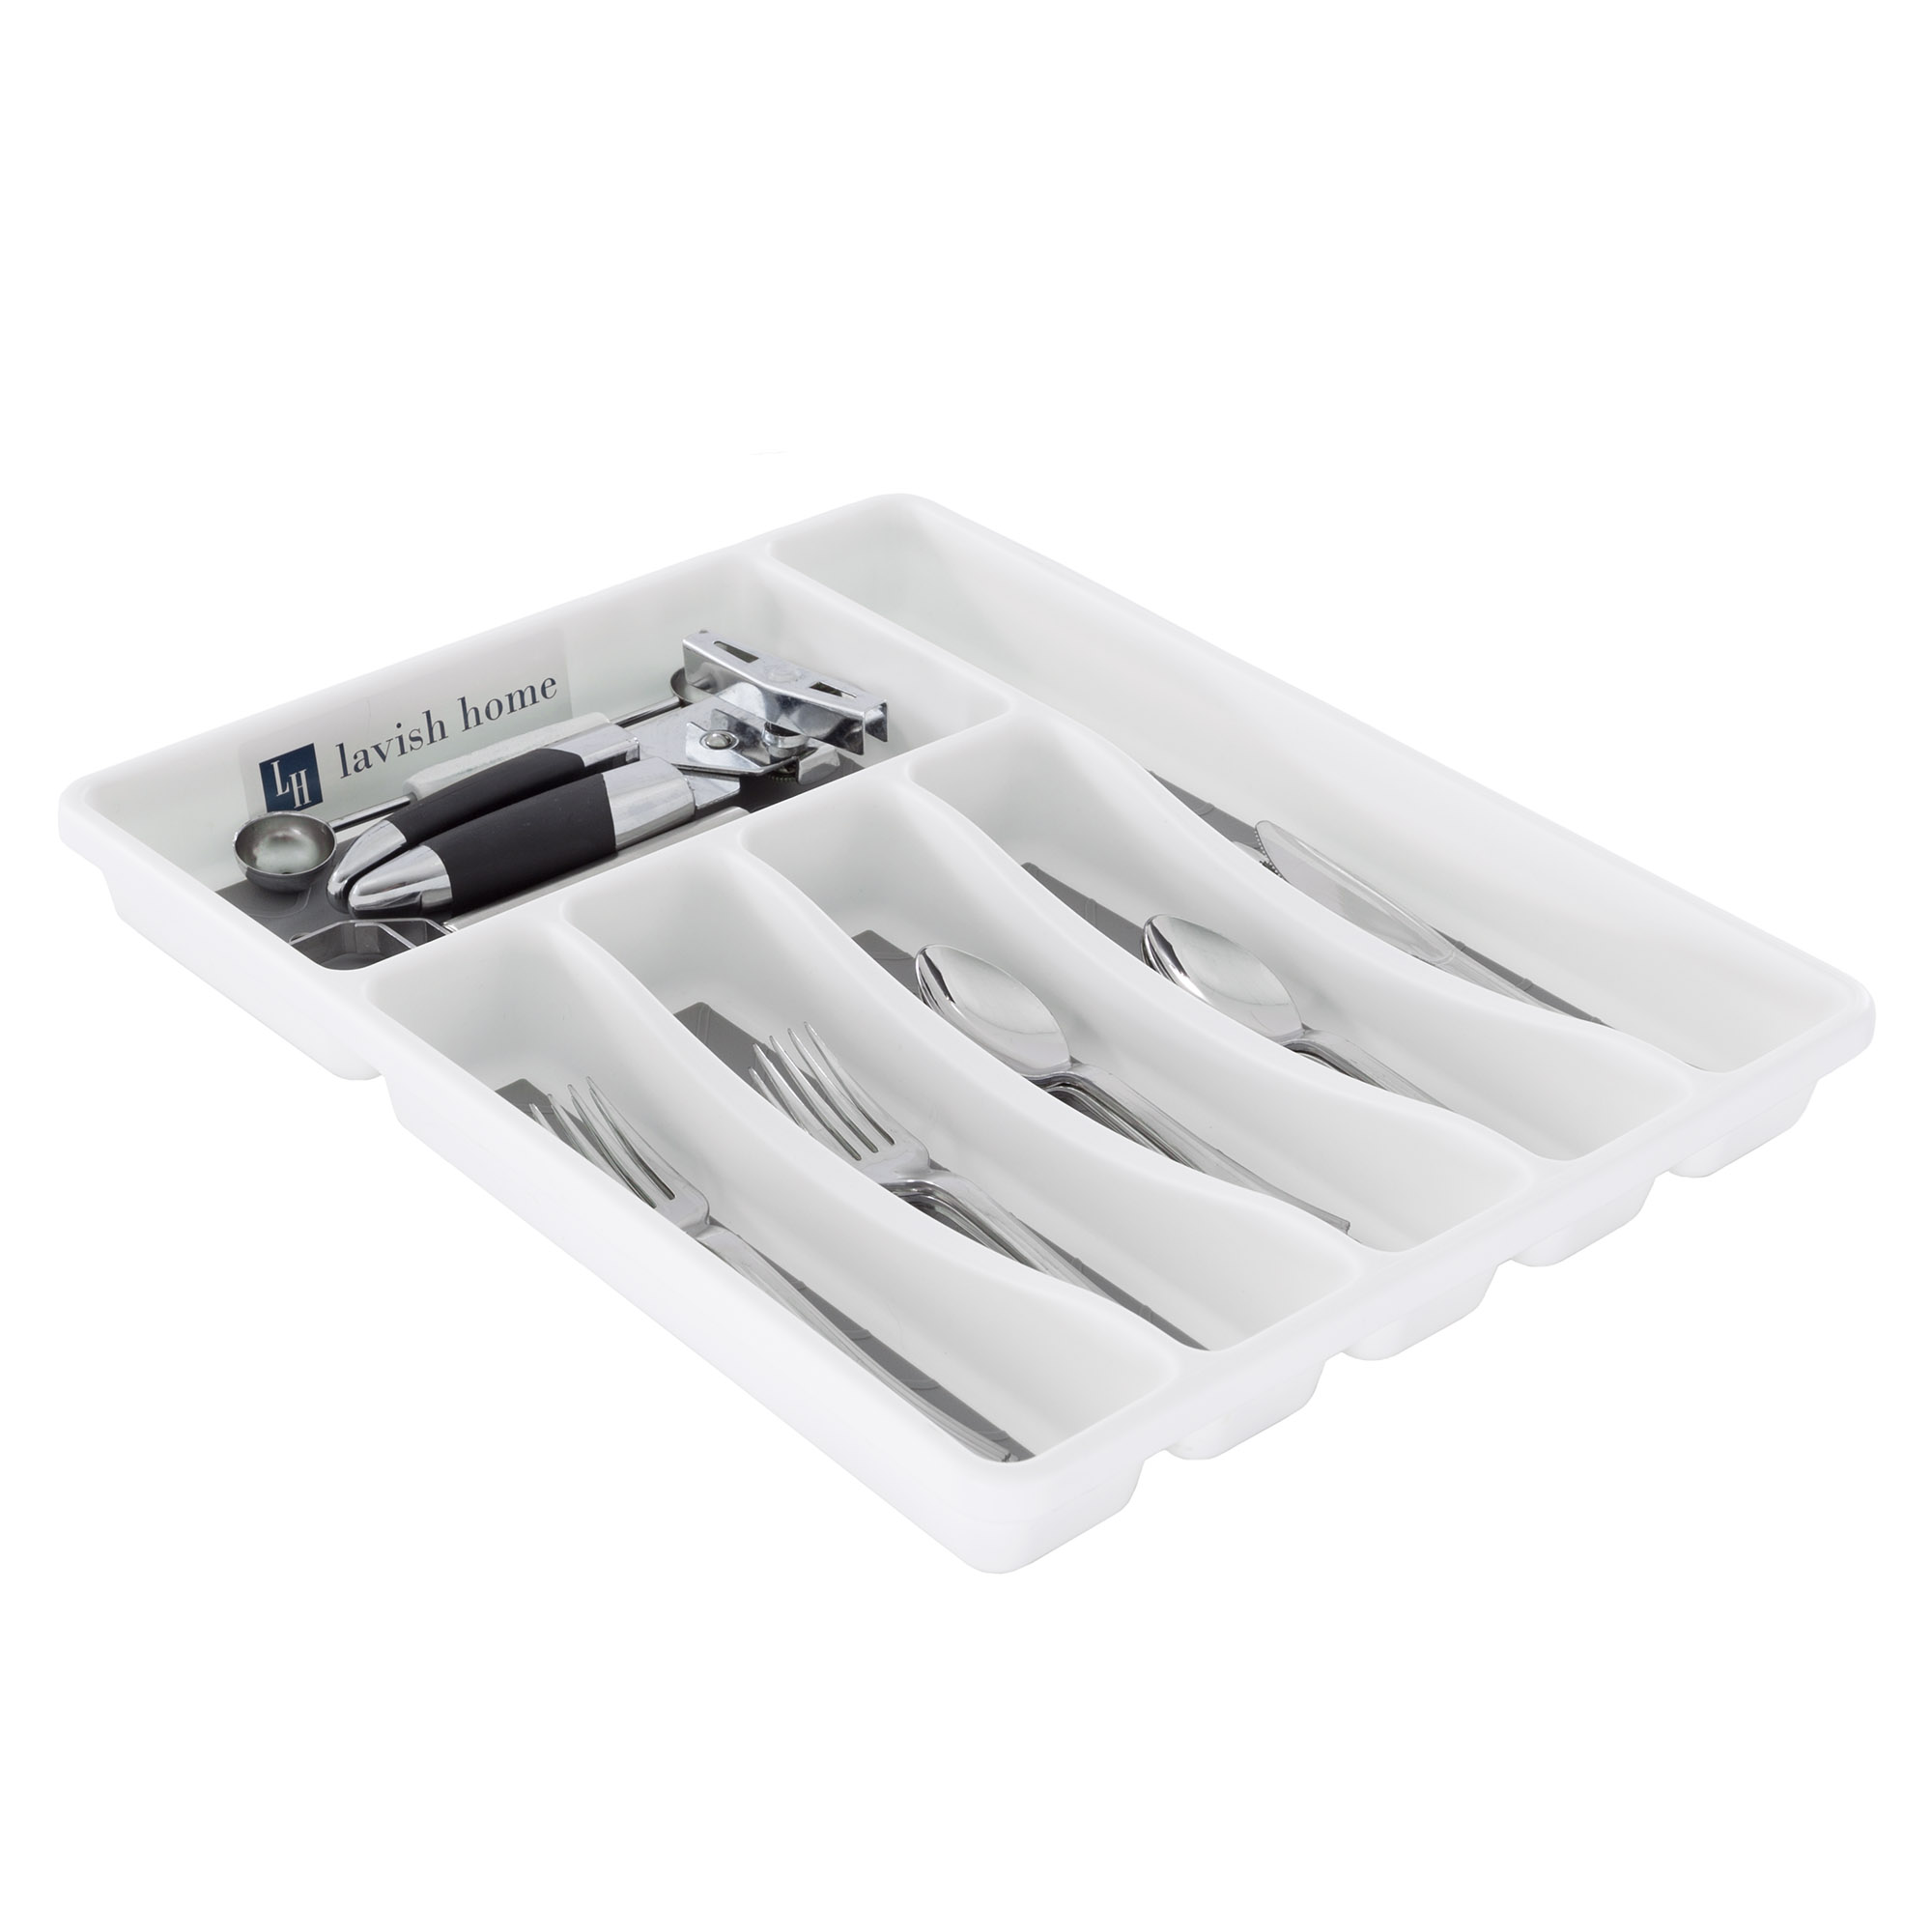 Lavish Home  1.75" Silverware Drawer Organizer with 6 Sections and Nonslip Tray - image 2 of 4